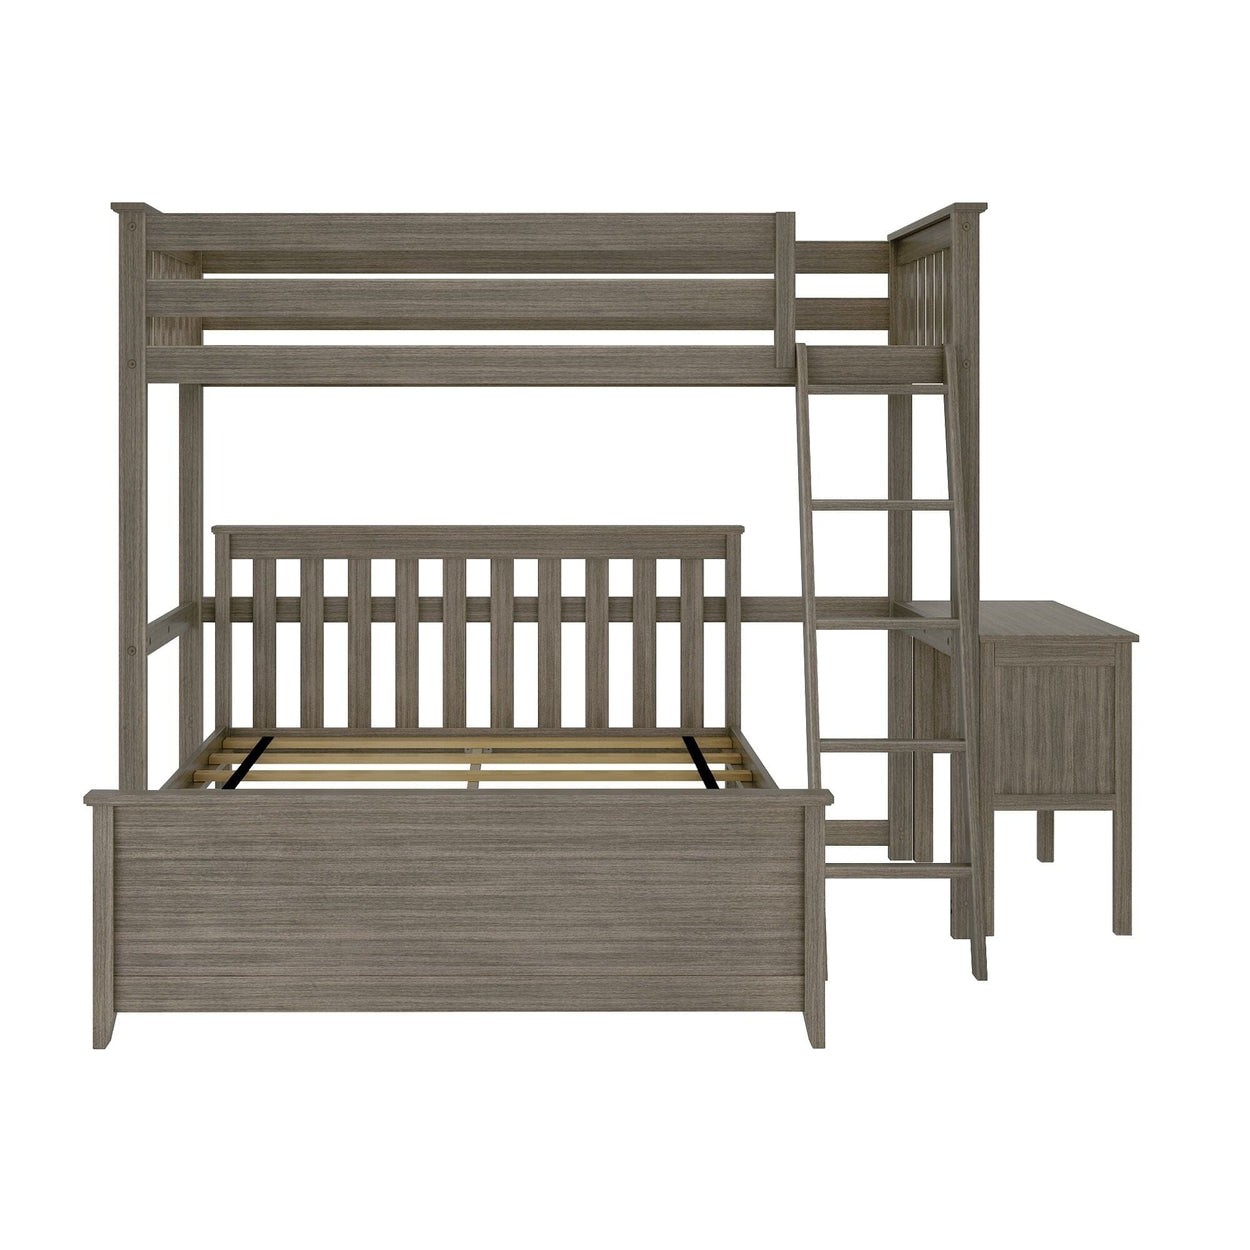 18-802-151 : Bunk Beds L-Shaped Twin over Full Bunk Bed with Desk, Clay